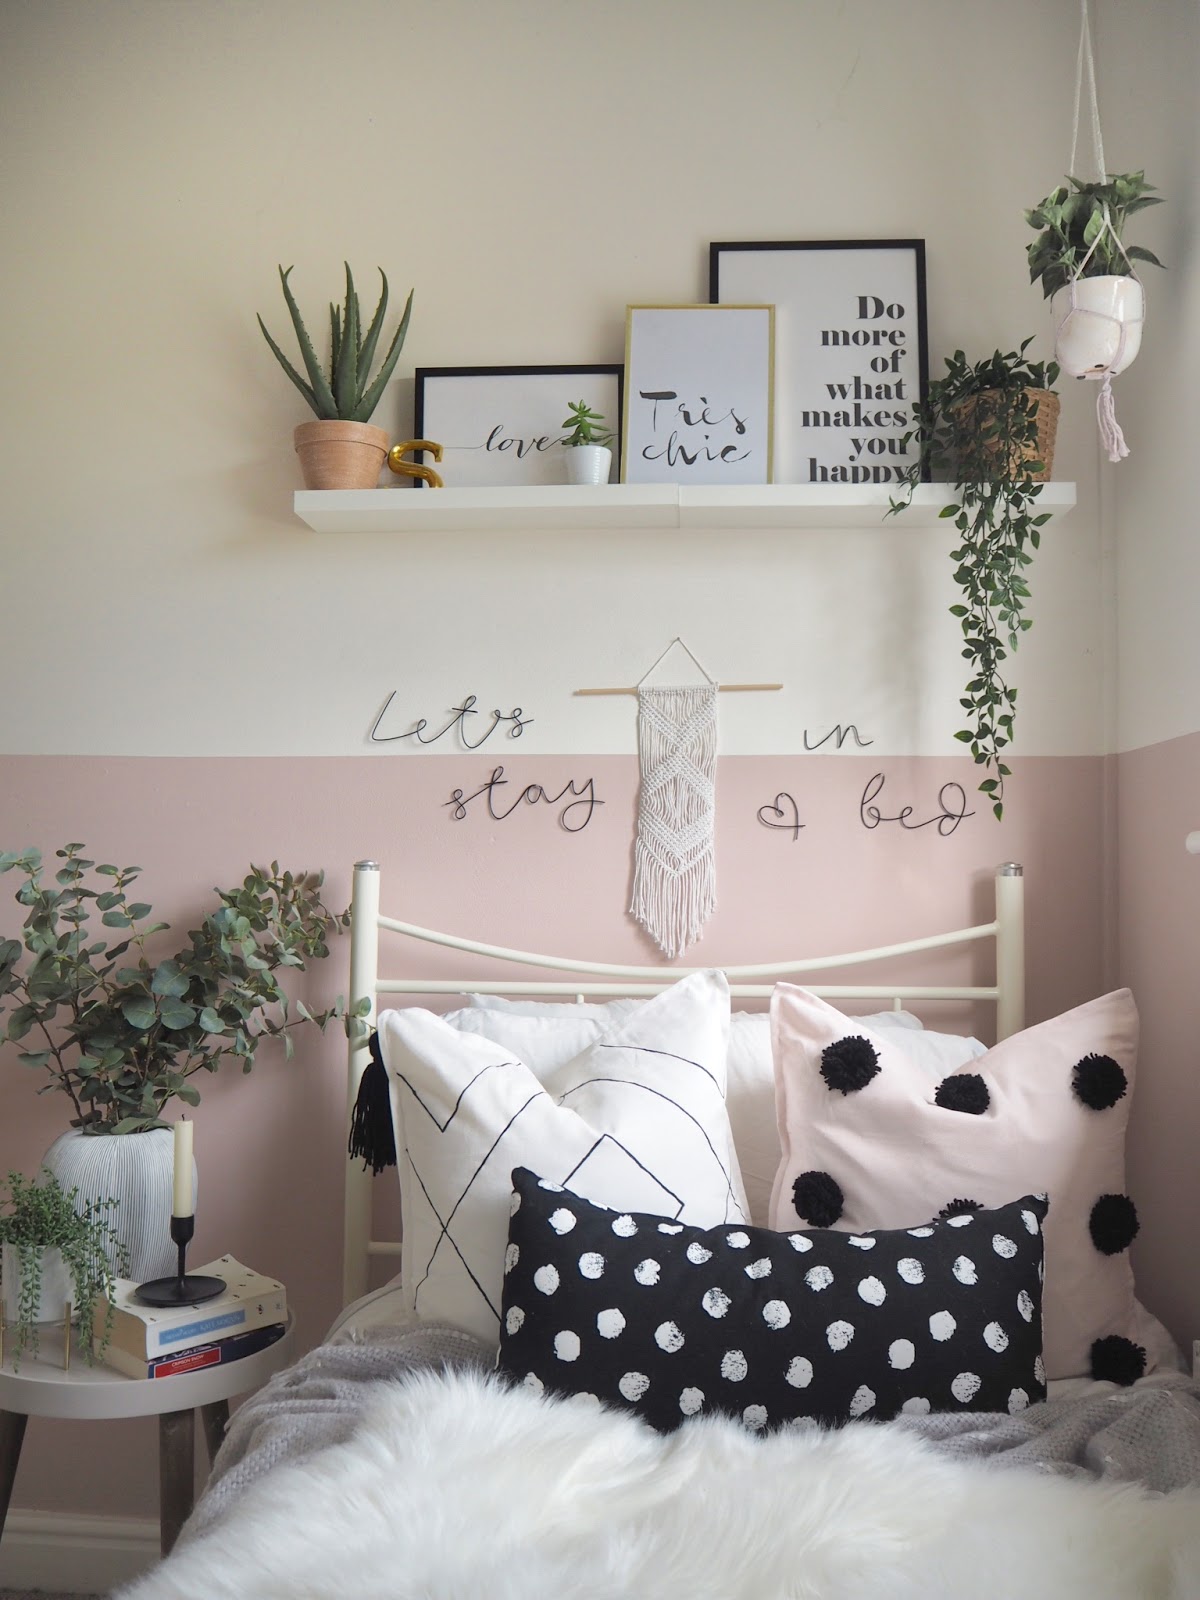 How to transform a room with half-painted walls. DIY room update. How to use frog tape to section off a wall and paint a feature. Boho bedroom transformation.